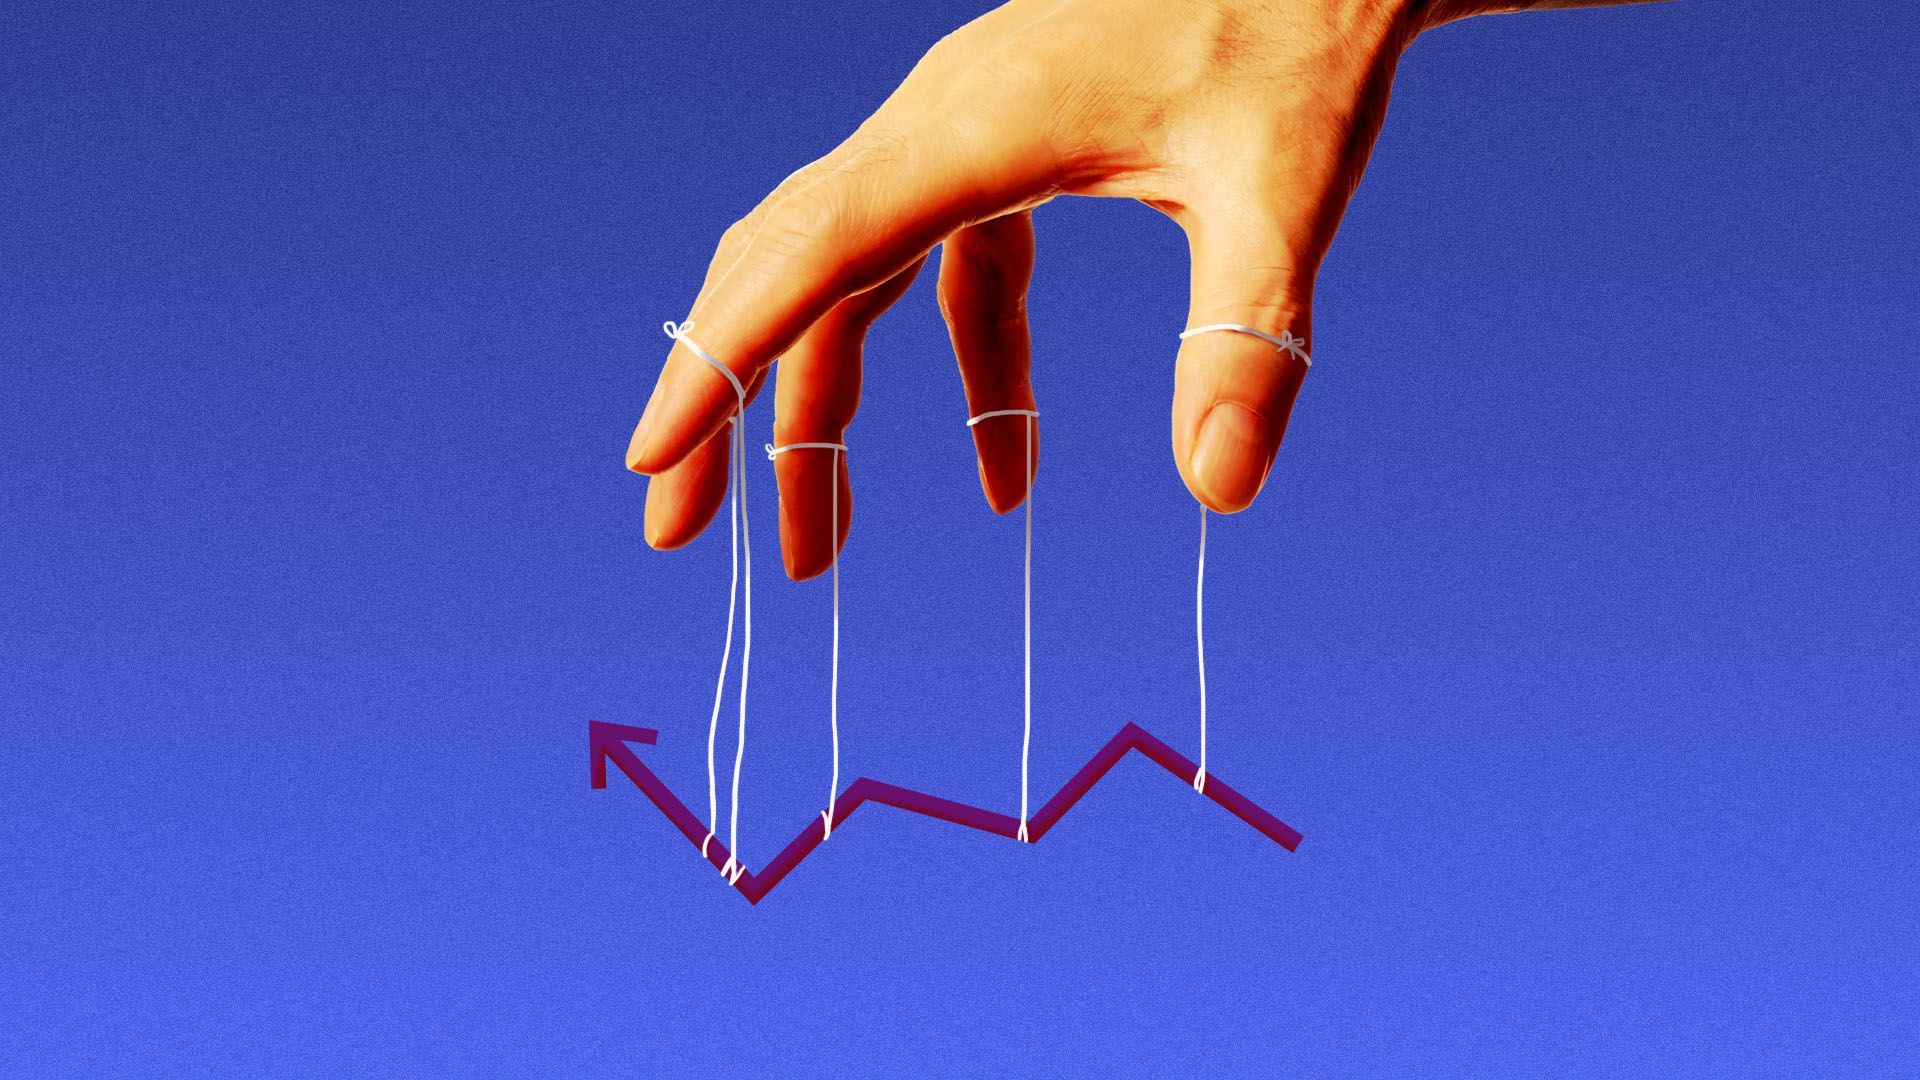 Illustration of a hand holding a bar graph